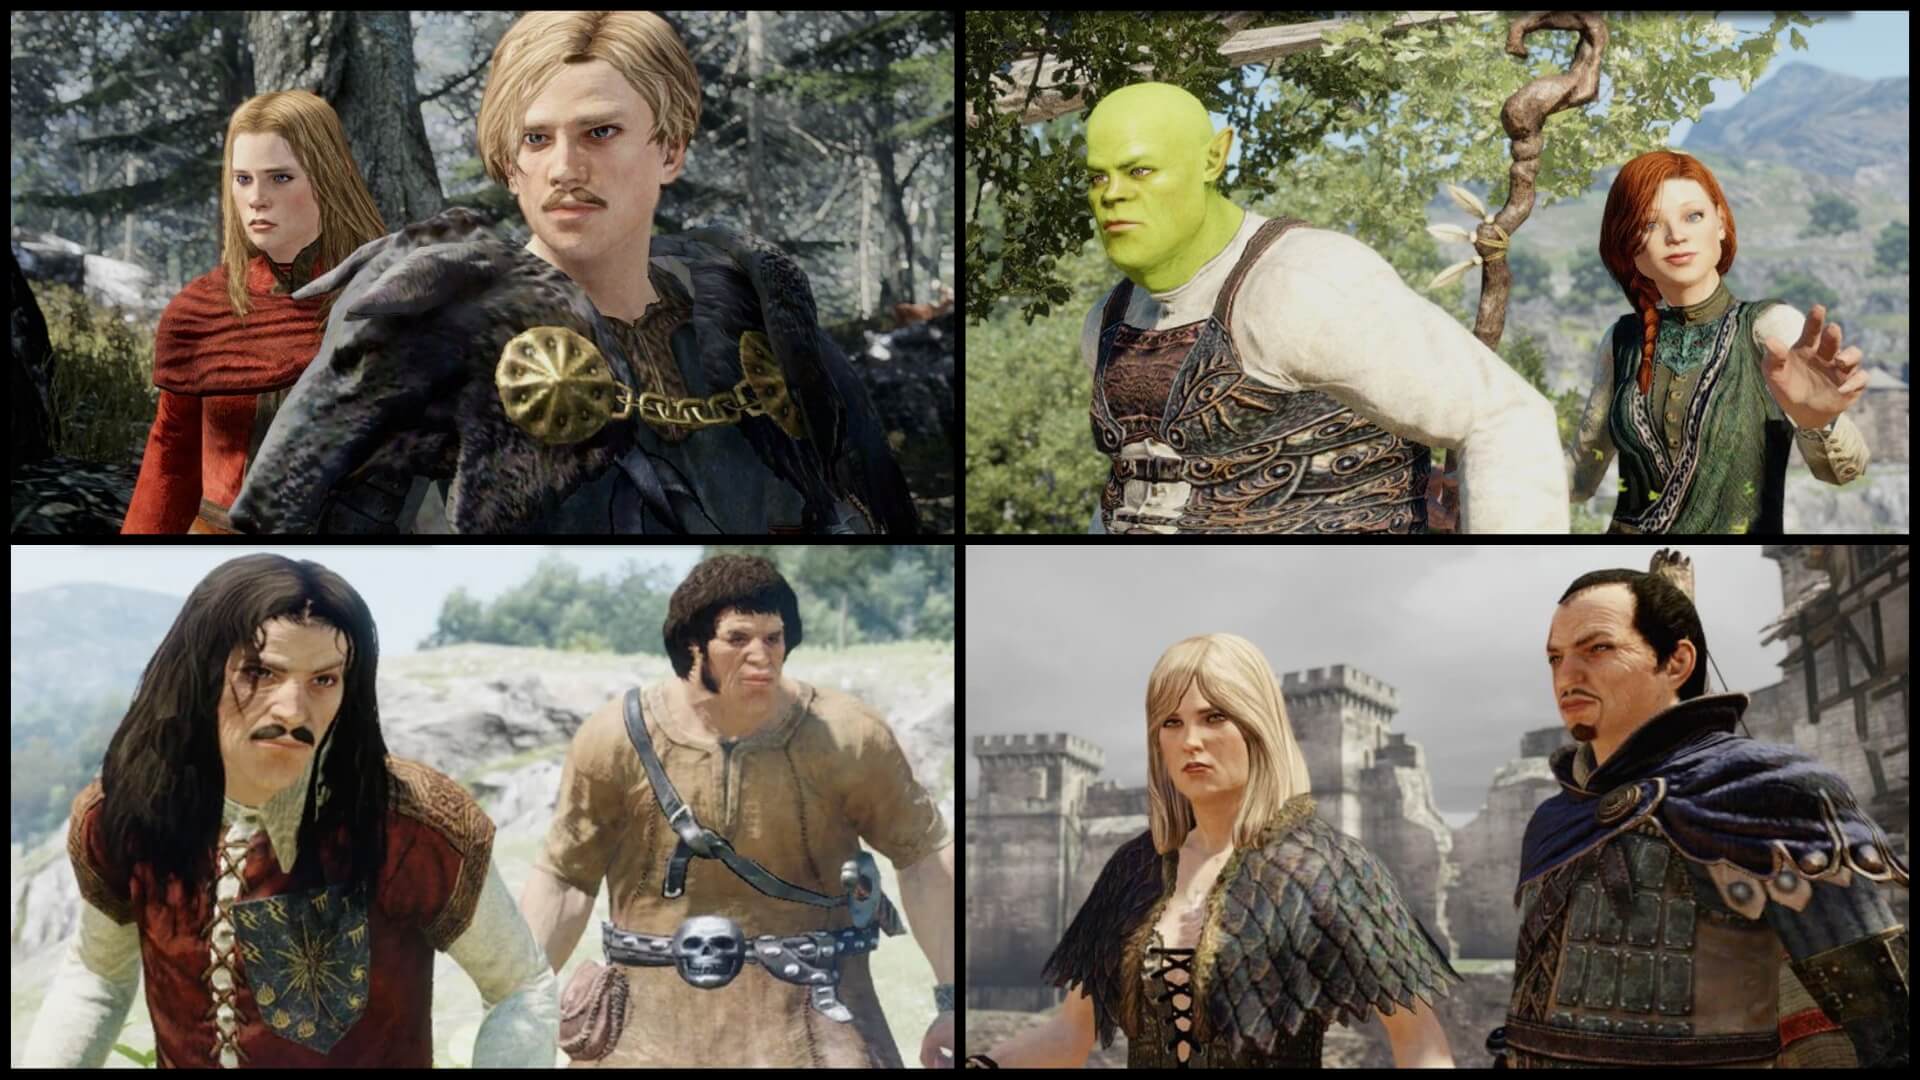 Props to Dragon's Dogma 2 for adding such creative customization